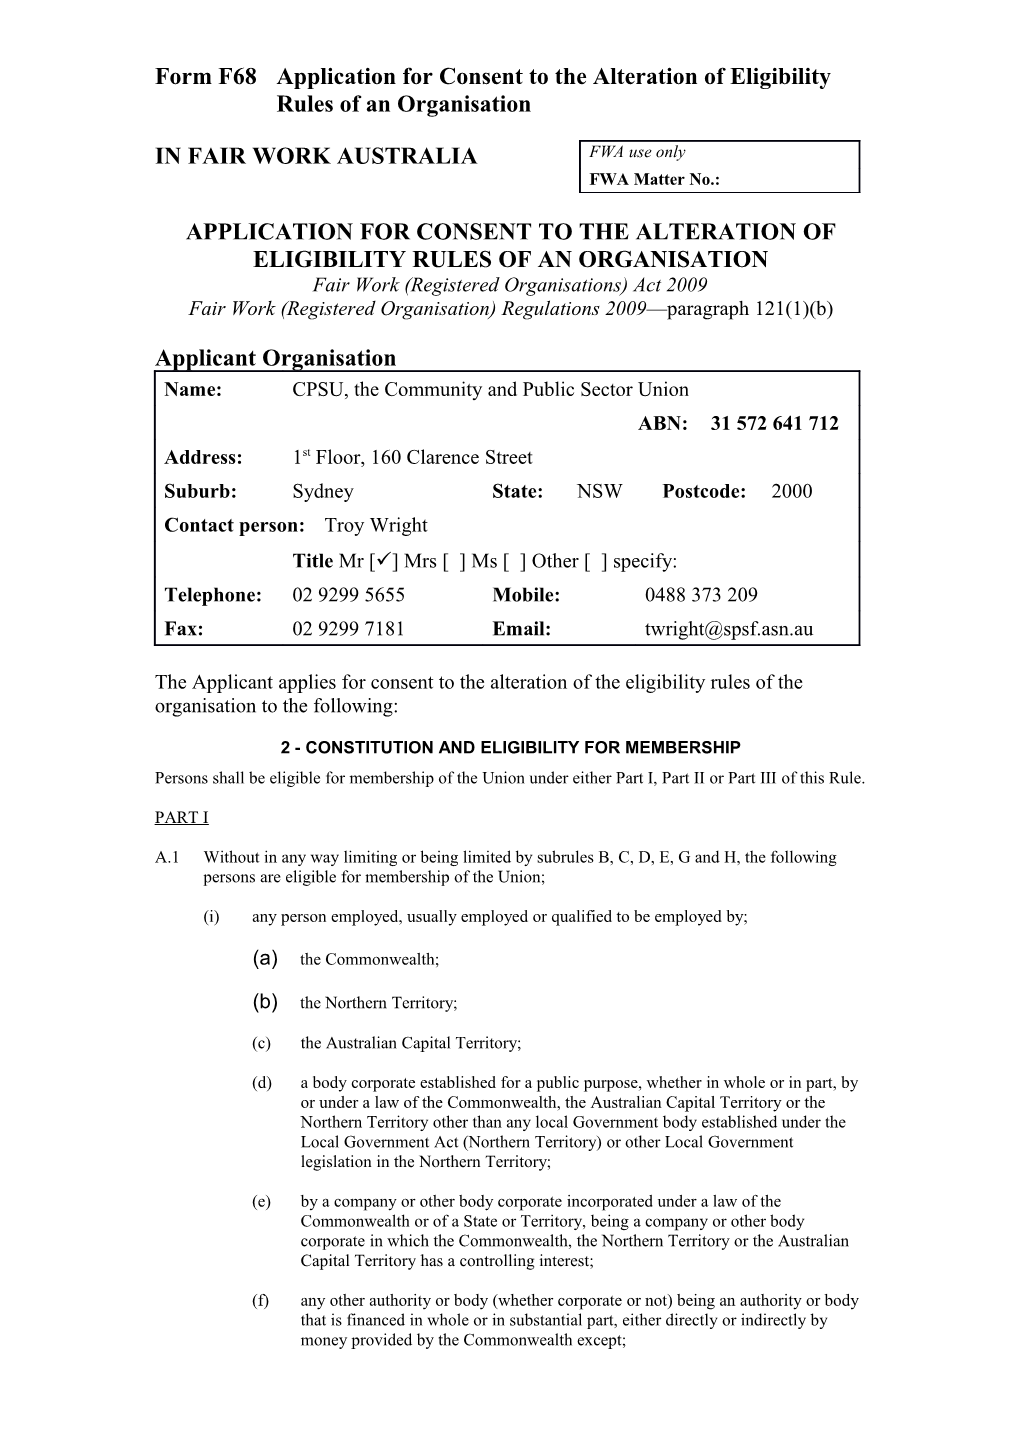 Form F68application for Consent to the Alteration of Eligibility Rules of an Organisation